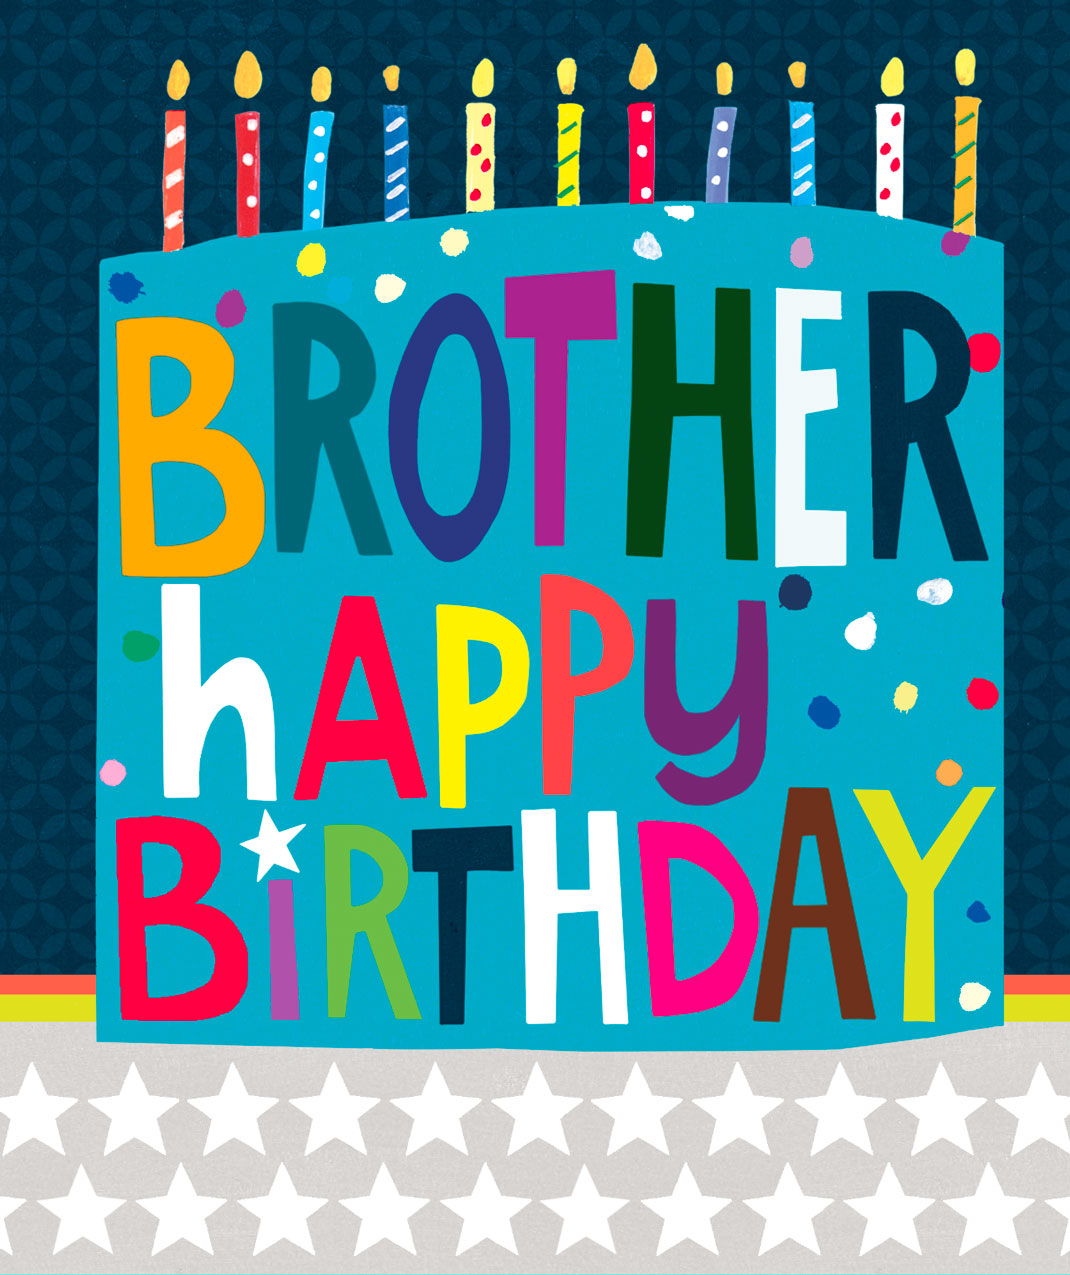 Big Cake Brother Birthday Card from Penny Black